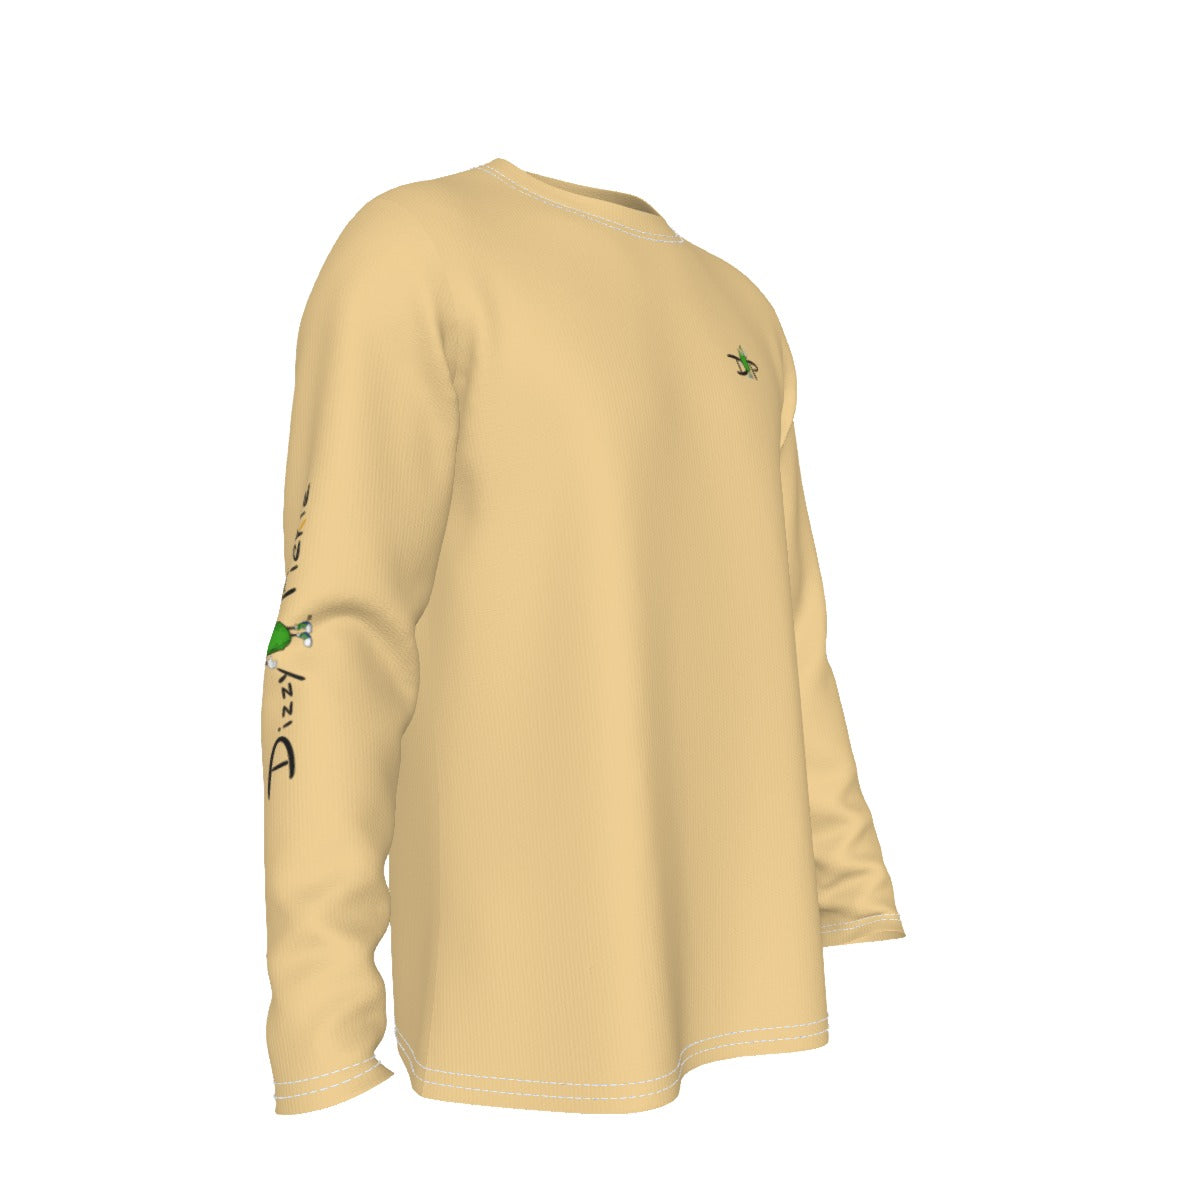 DZY P Classic - Sand - Men's Long Sleeve T-Shirt by Dizzy Pickle